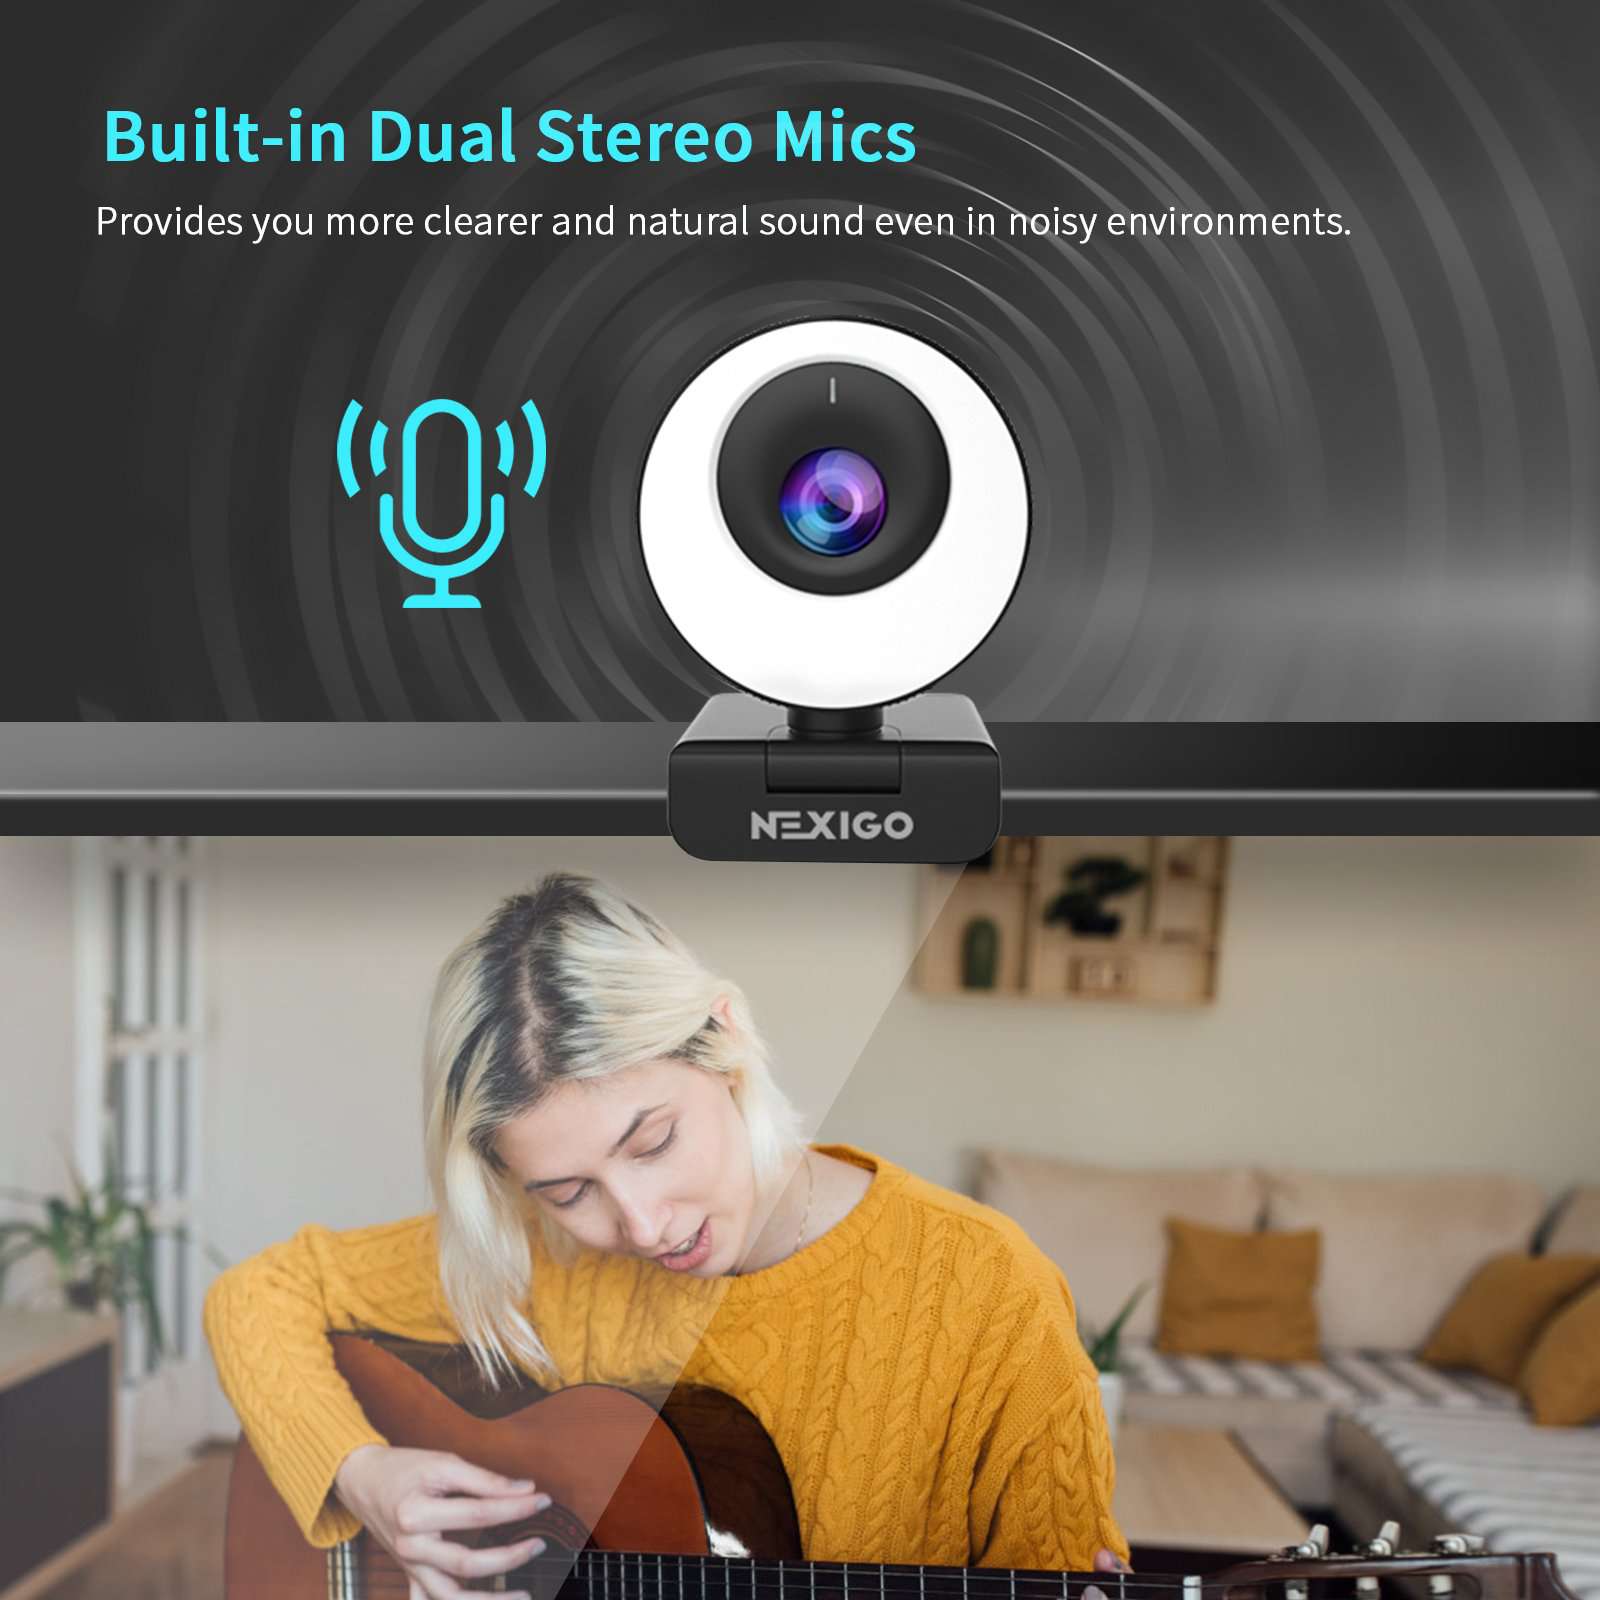 A camera with two built-in stereo microphones can block out background noise.